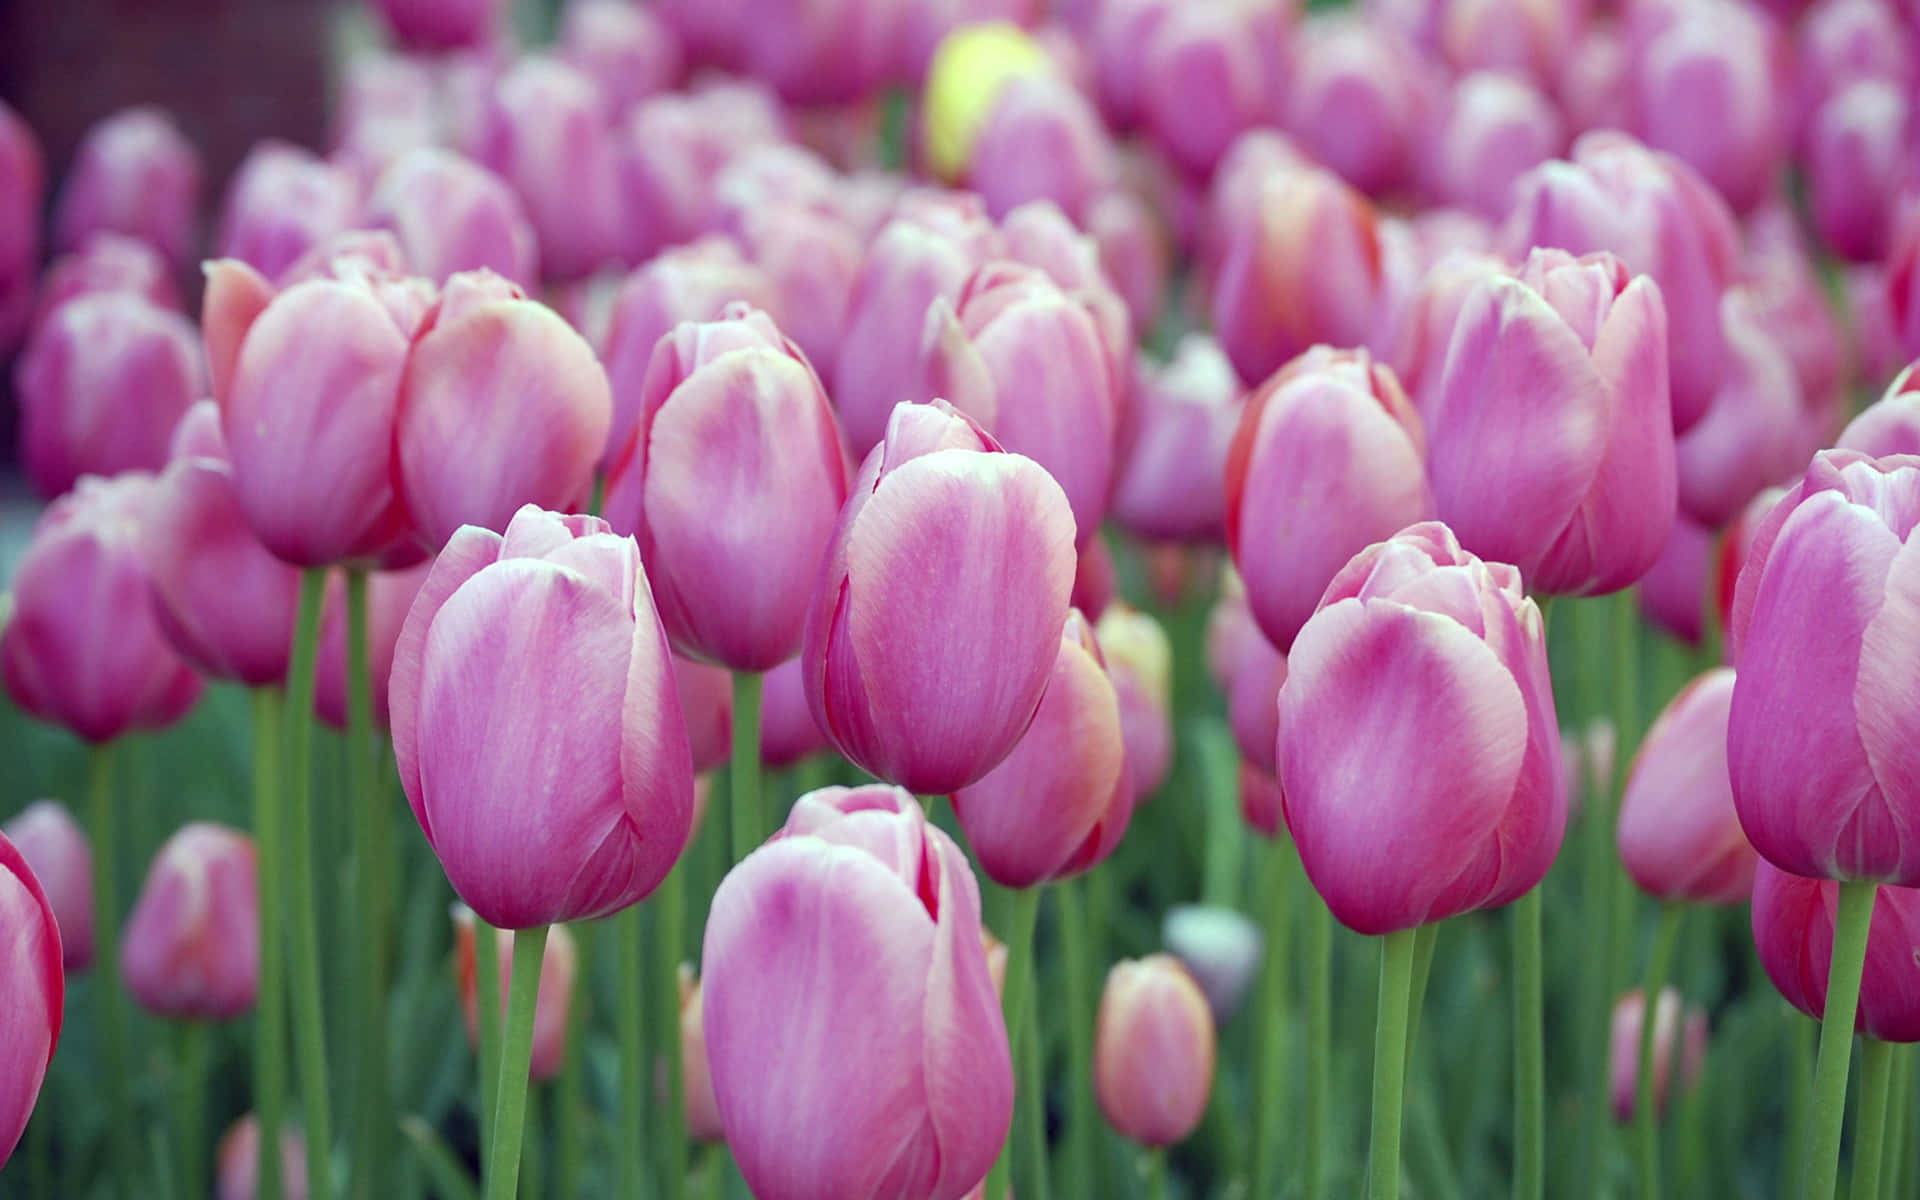 Spring is here with a burst of beautiful tulips!